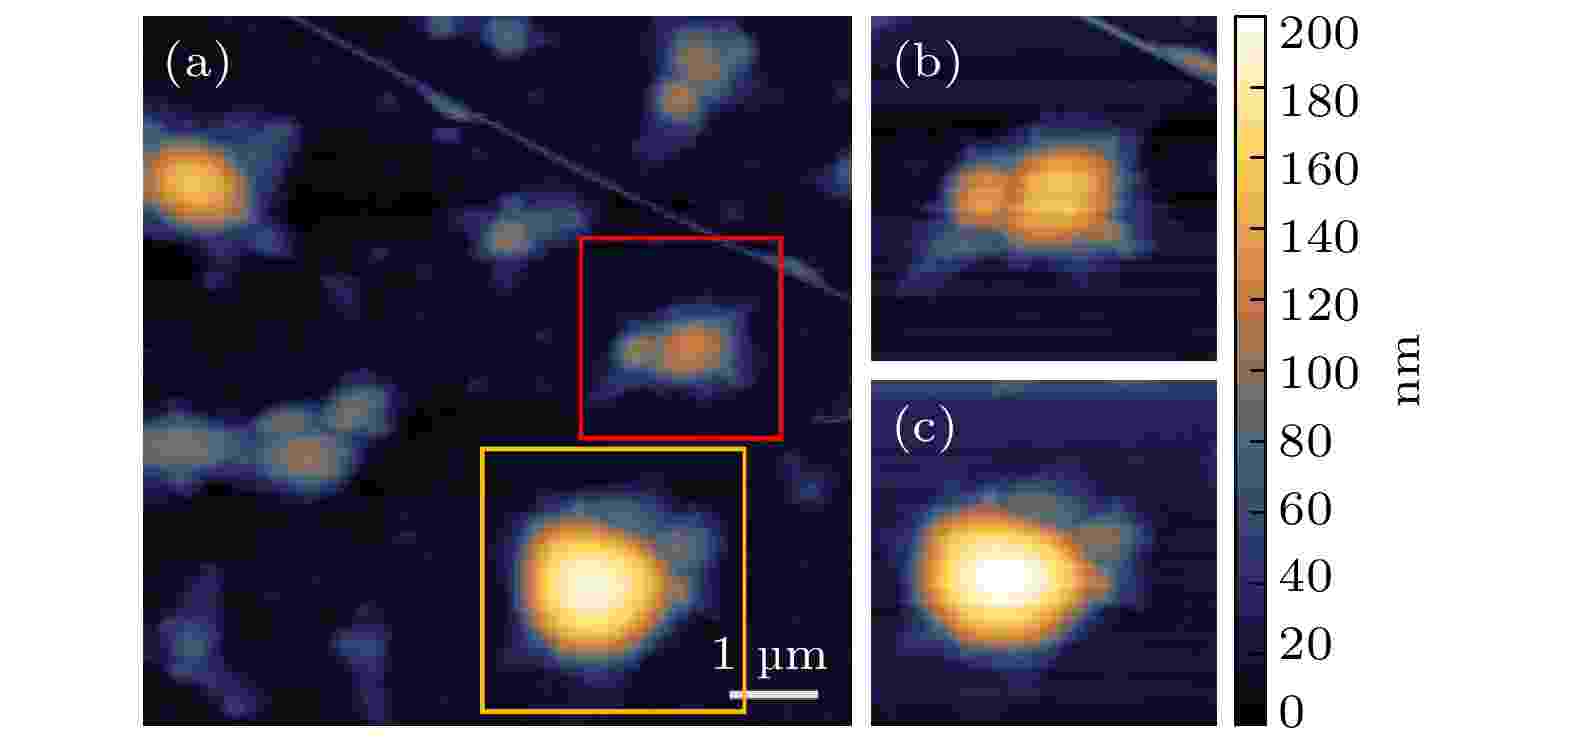 Typical AFM images of h-BN bubbles: (a) Topography of h-BN bubbles in different size and distribution density. Scale bar, 1 μm; (b), (c) AFM images taken from the red and orange box in panel (a) respectively. The scale of height sits on the right.